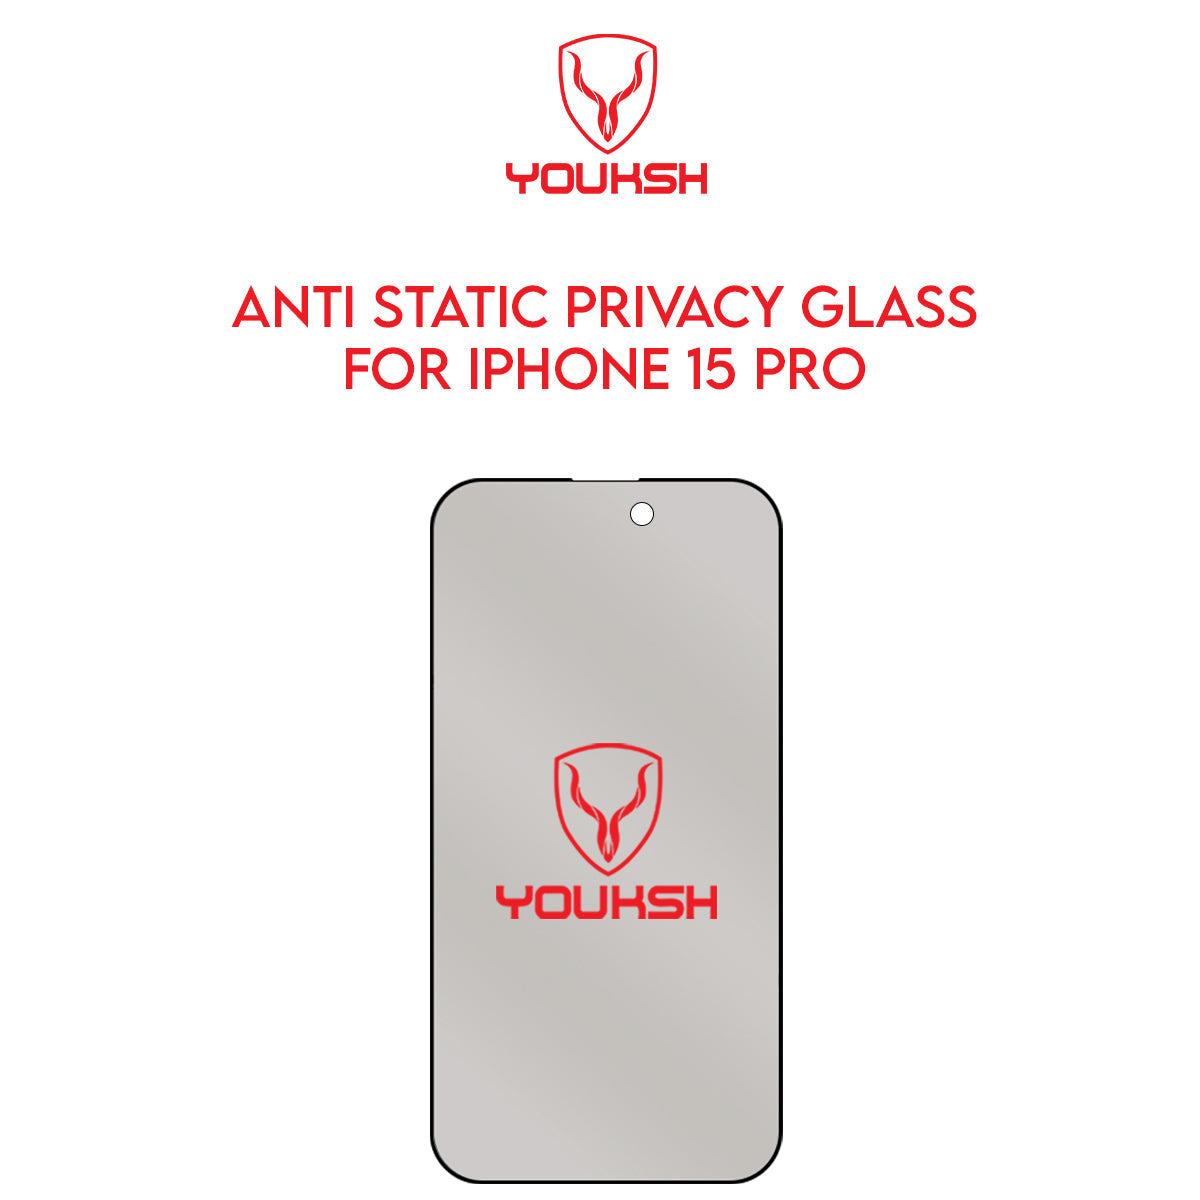 YOUKSH Apple iPhone 15 Pro (6.1) Privacy Glass Protector - YOUKSH Apple iPhone 15 Pro (6.1) Anti Static Glass Protector - With YOUKSH Installation kit.